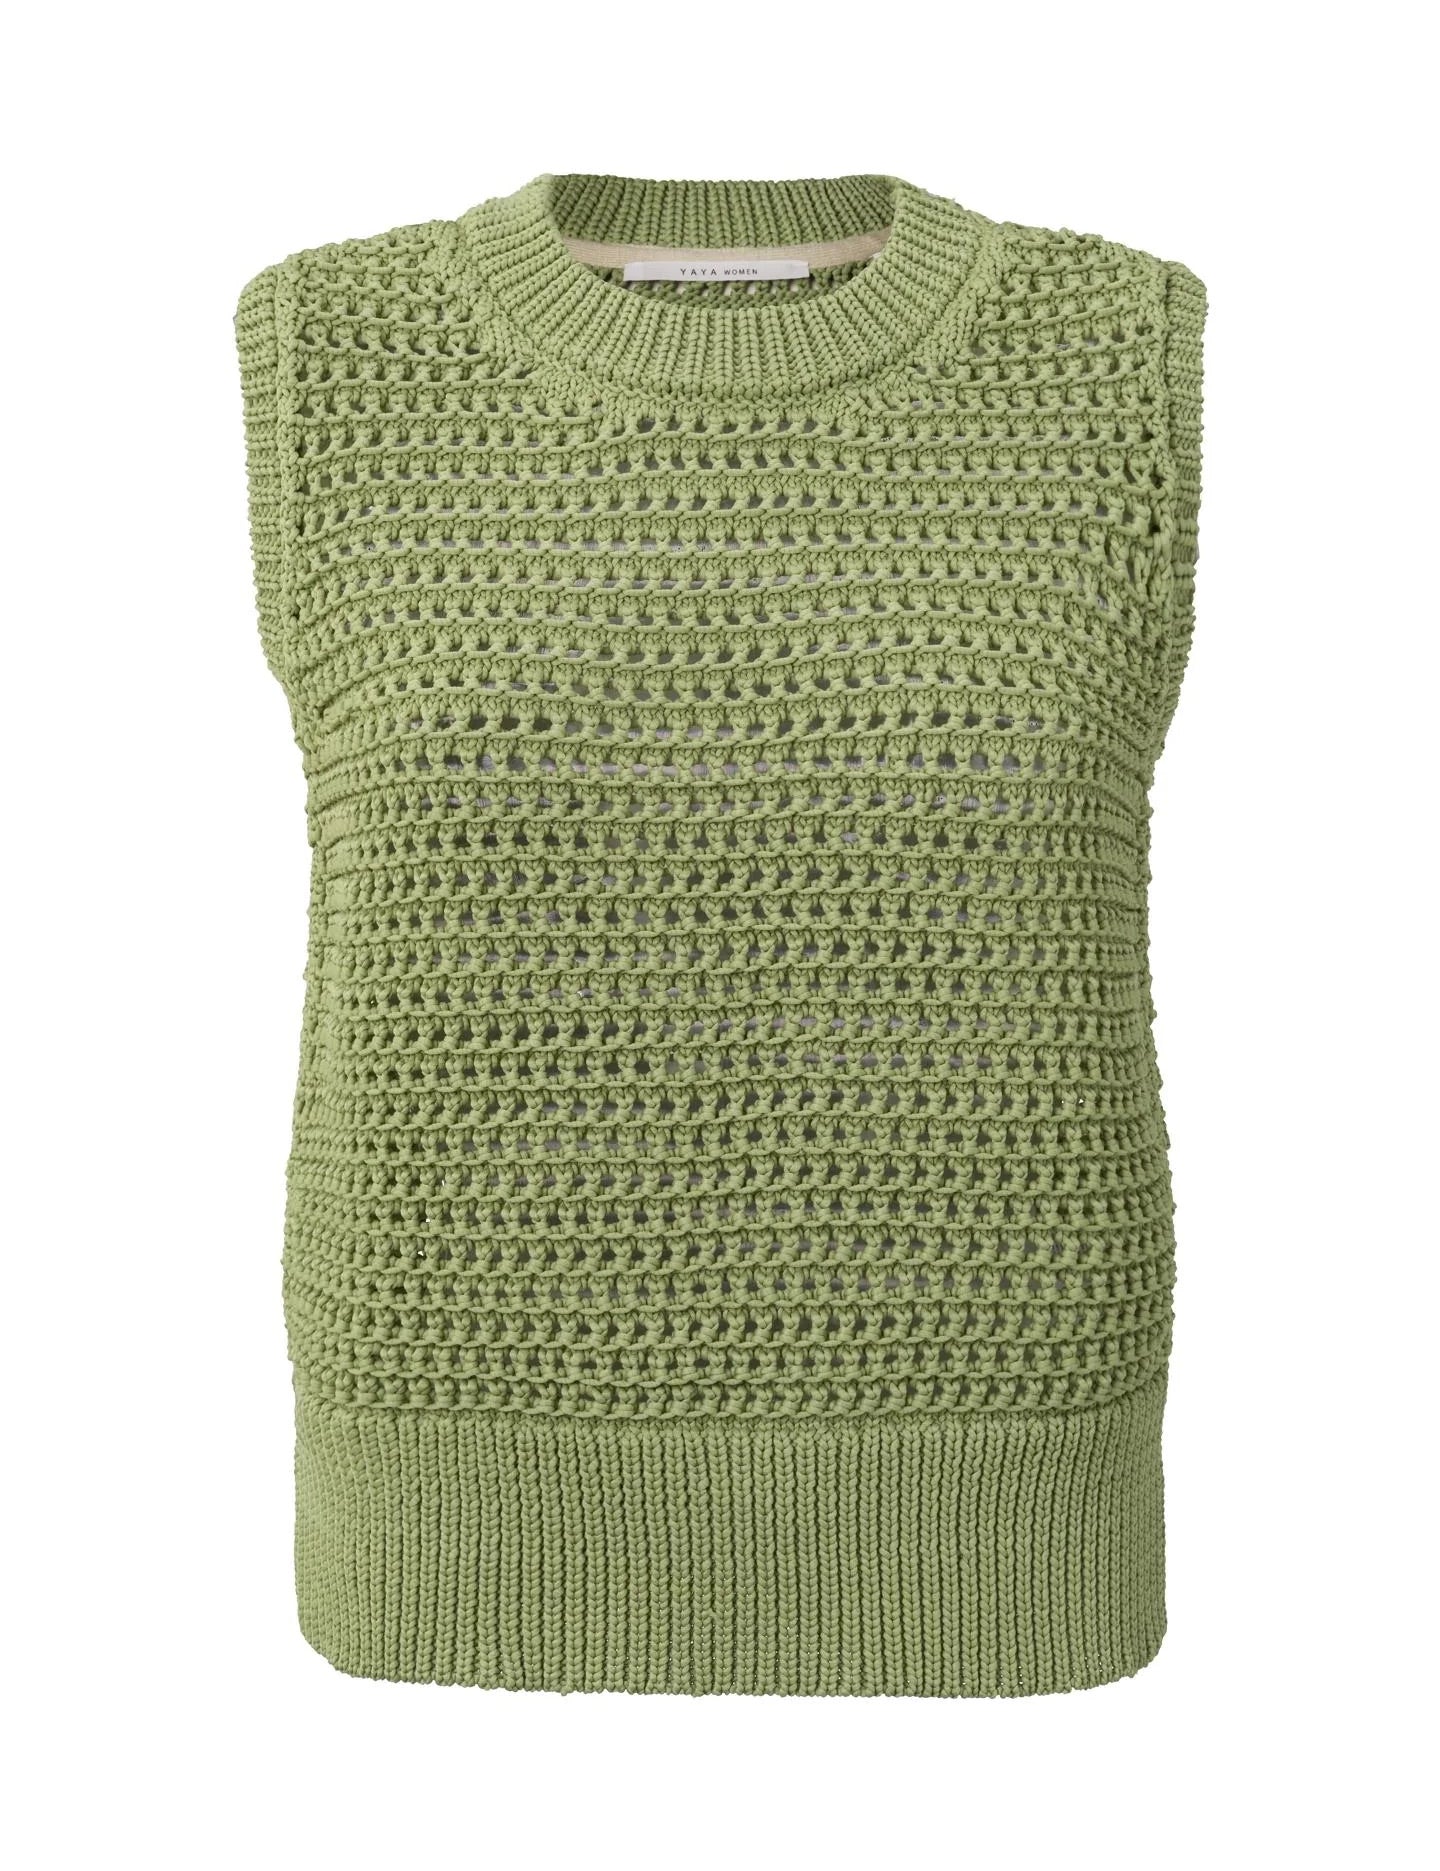 tape-yarn-spencer-with-round-neck-and-ribbed-details-sage-green_8338cf29-64c1-43d1-bf0e-57c20babfae5_2880x_jpg.jpg